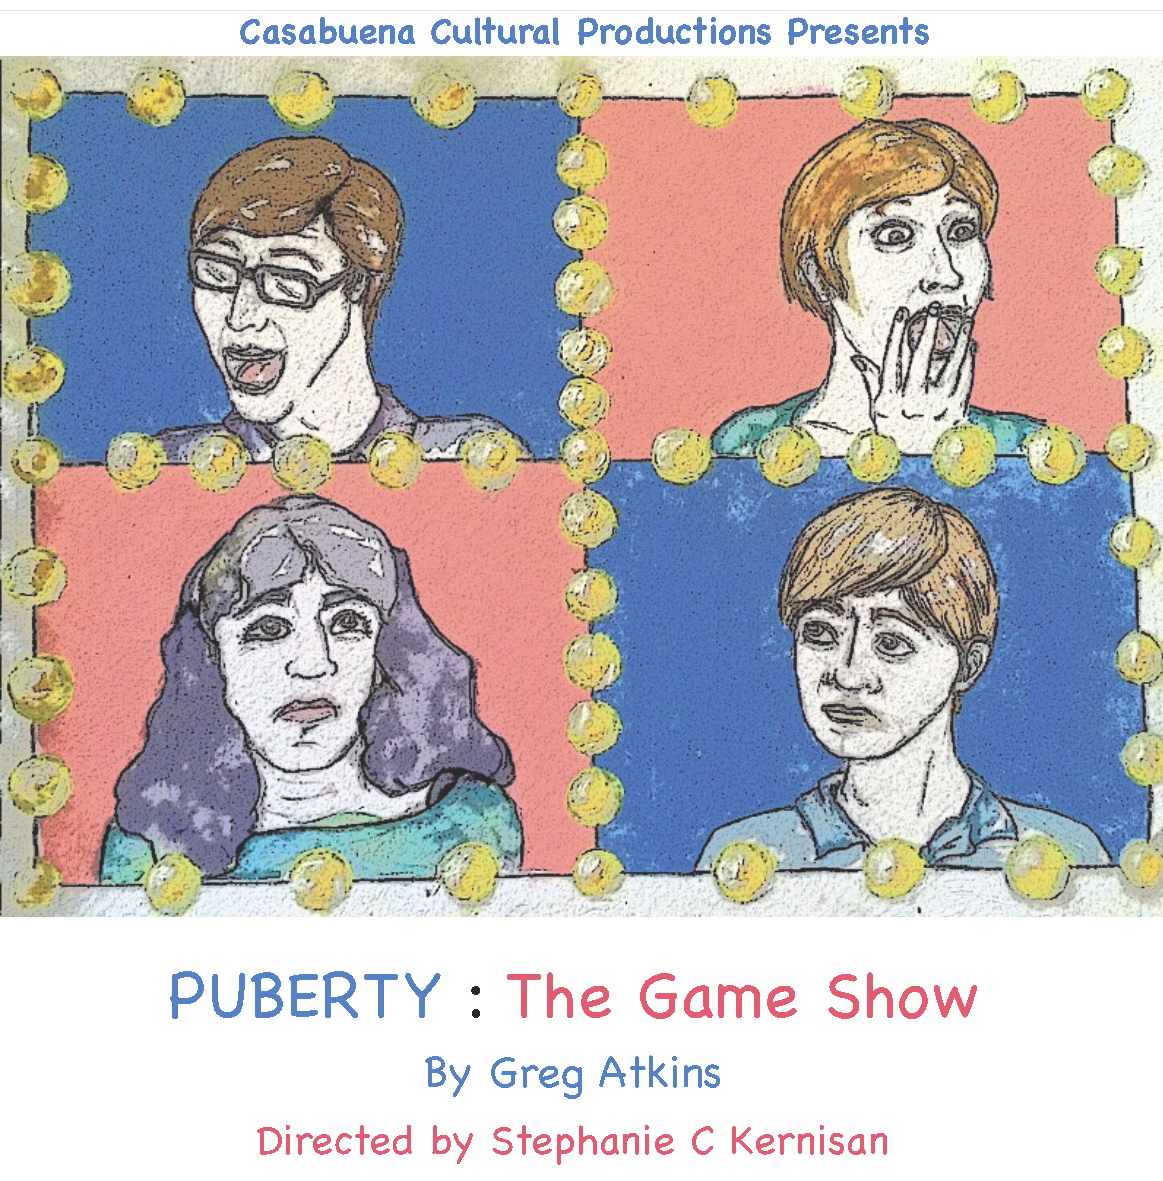 Meet the Youth Cast of Puberty: The Game Show!